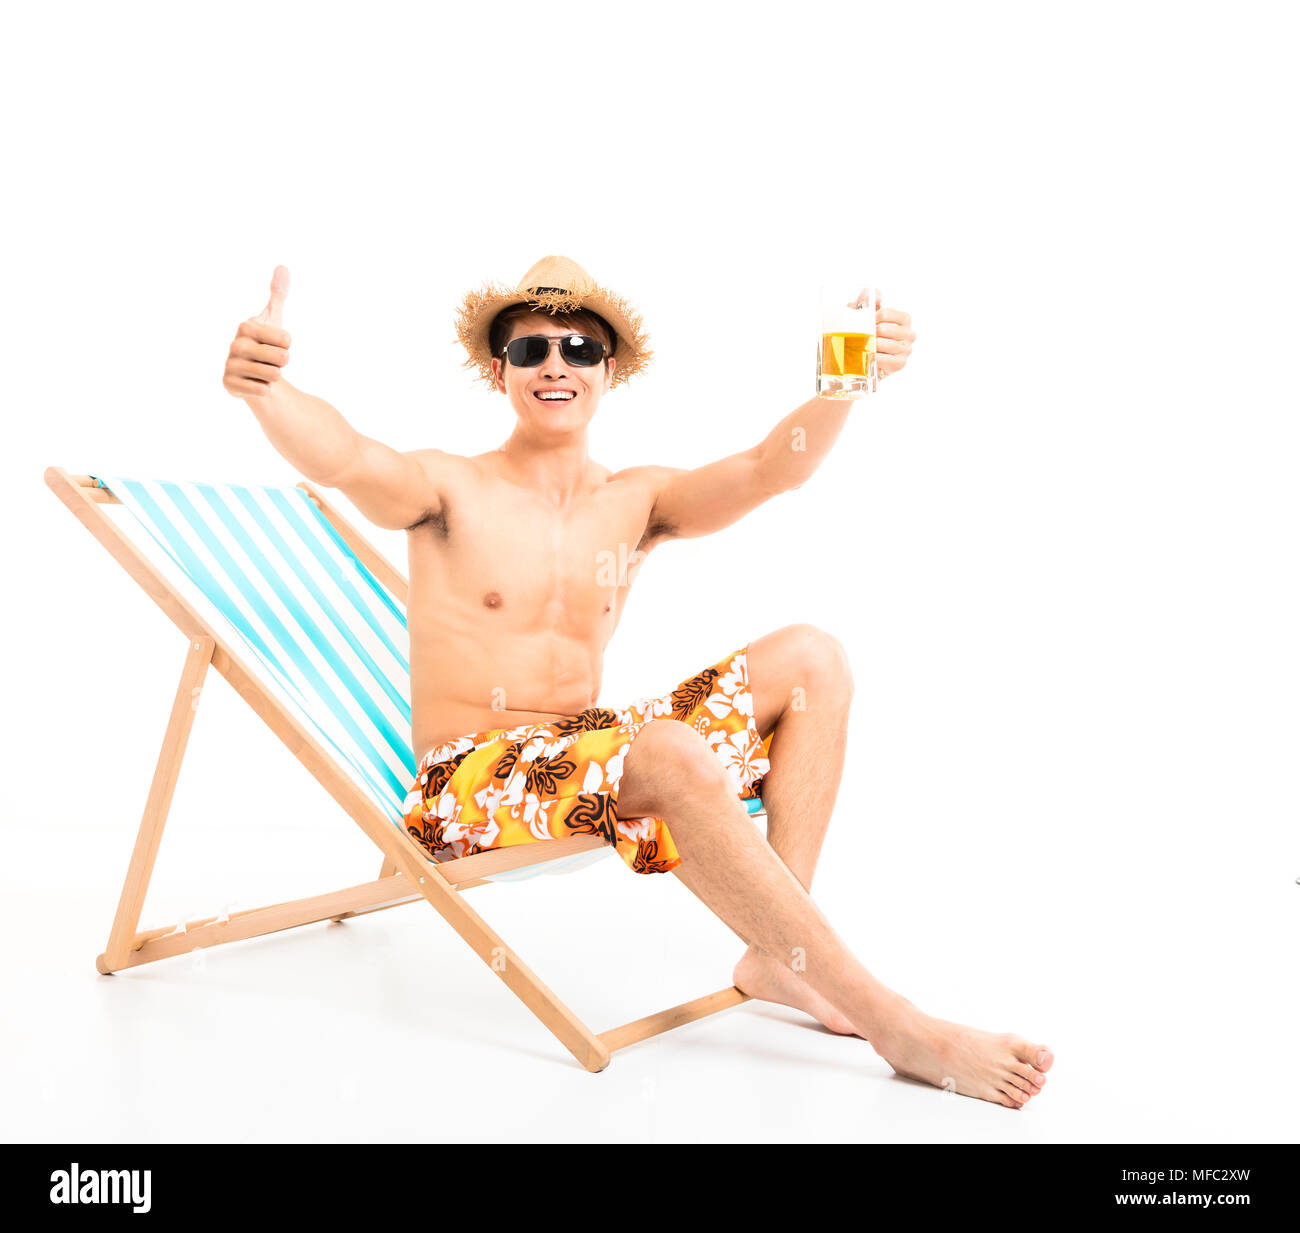 Relaxed man sitting in lounger chair and drinking beer Stock Photo